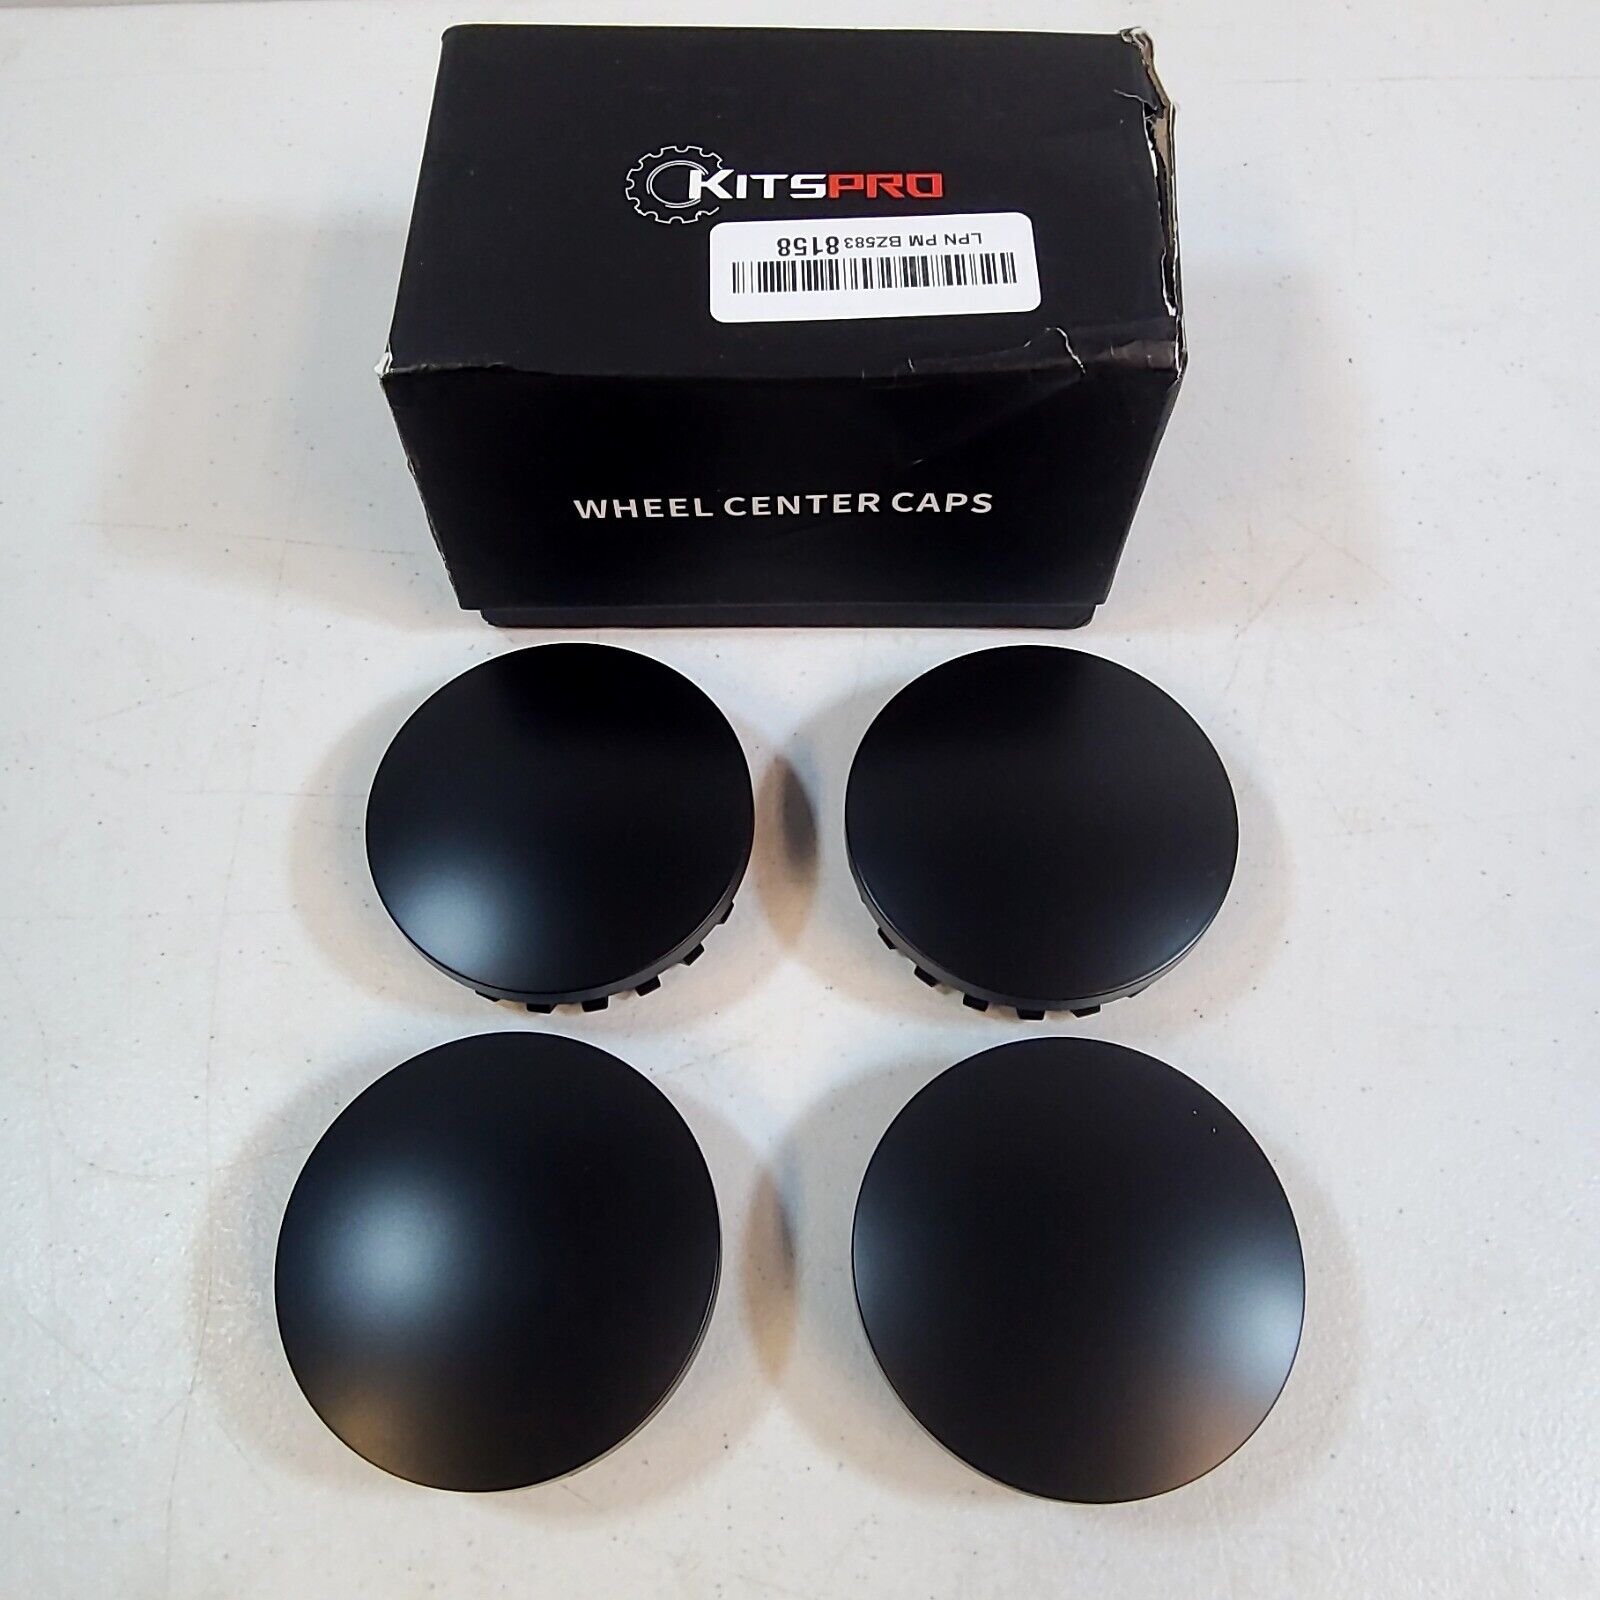 KitsPro 3.25Inch 83MM Wheel Center Caps for Chevrolet Chevy GMC Colorado Tahoe